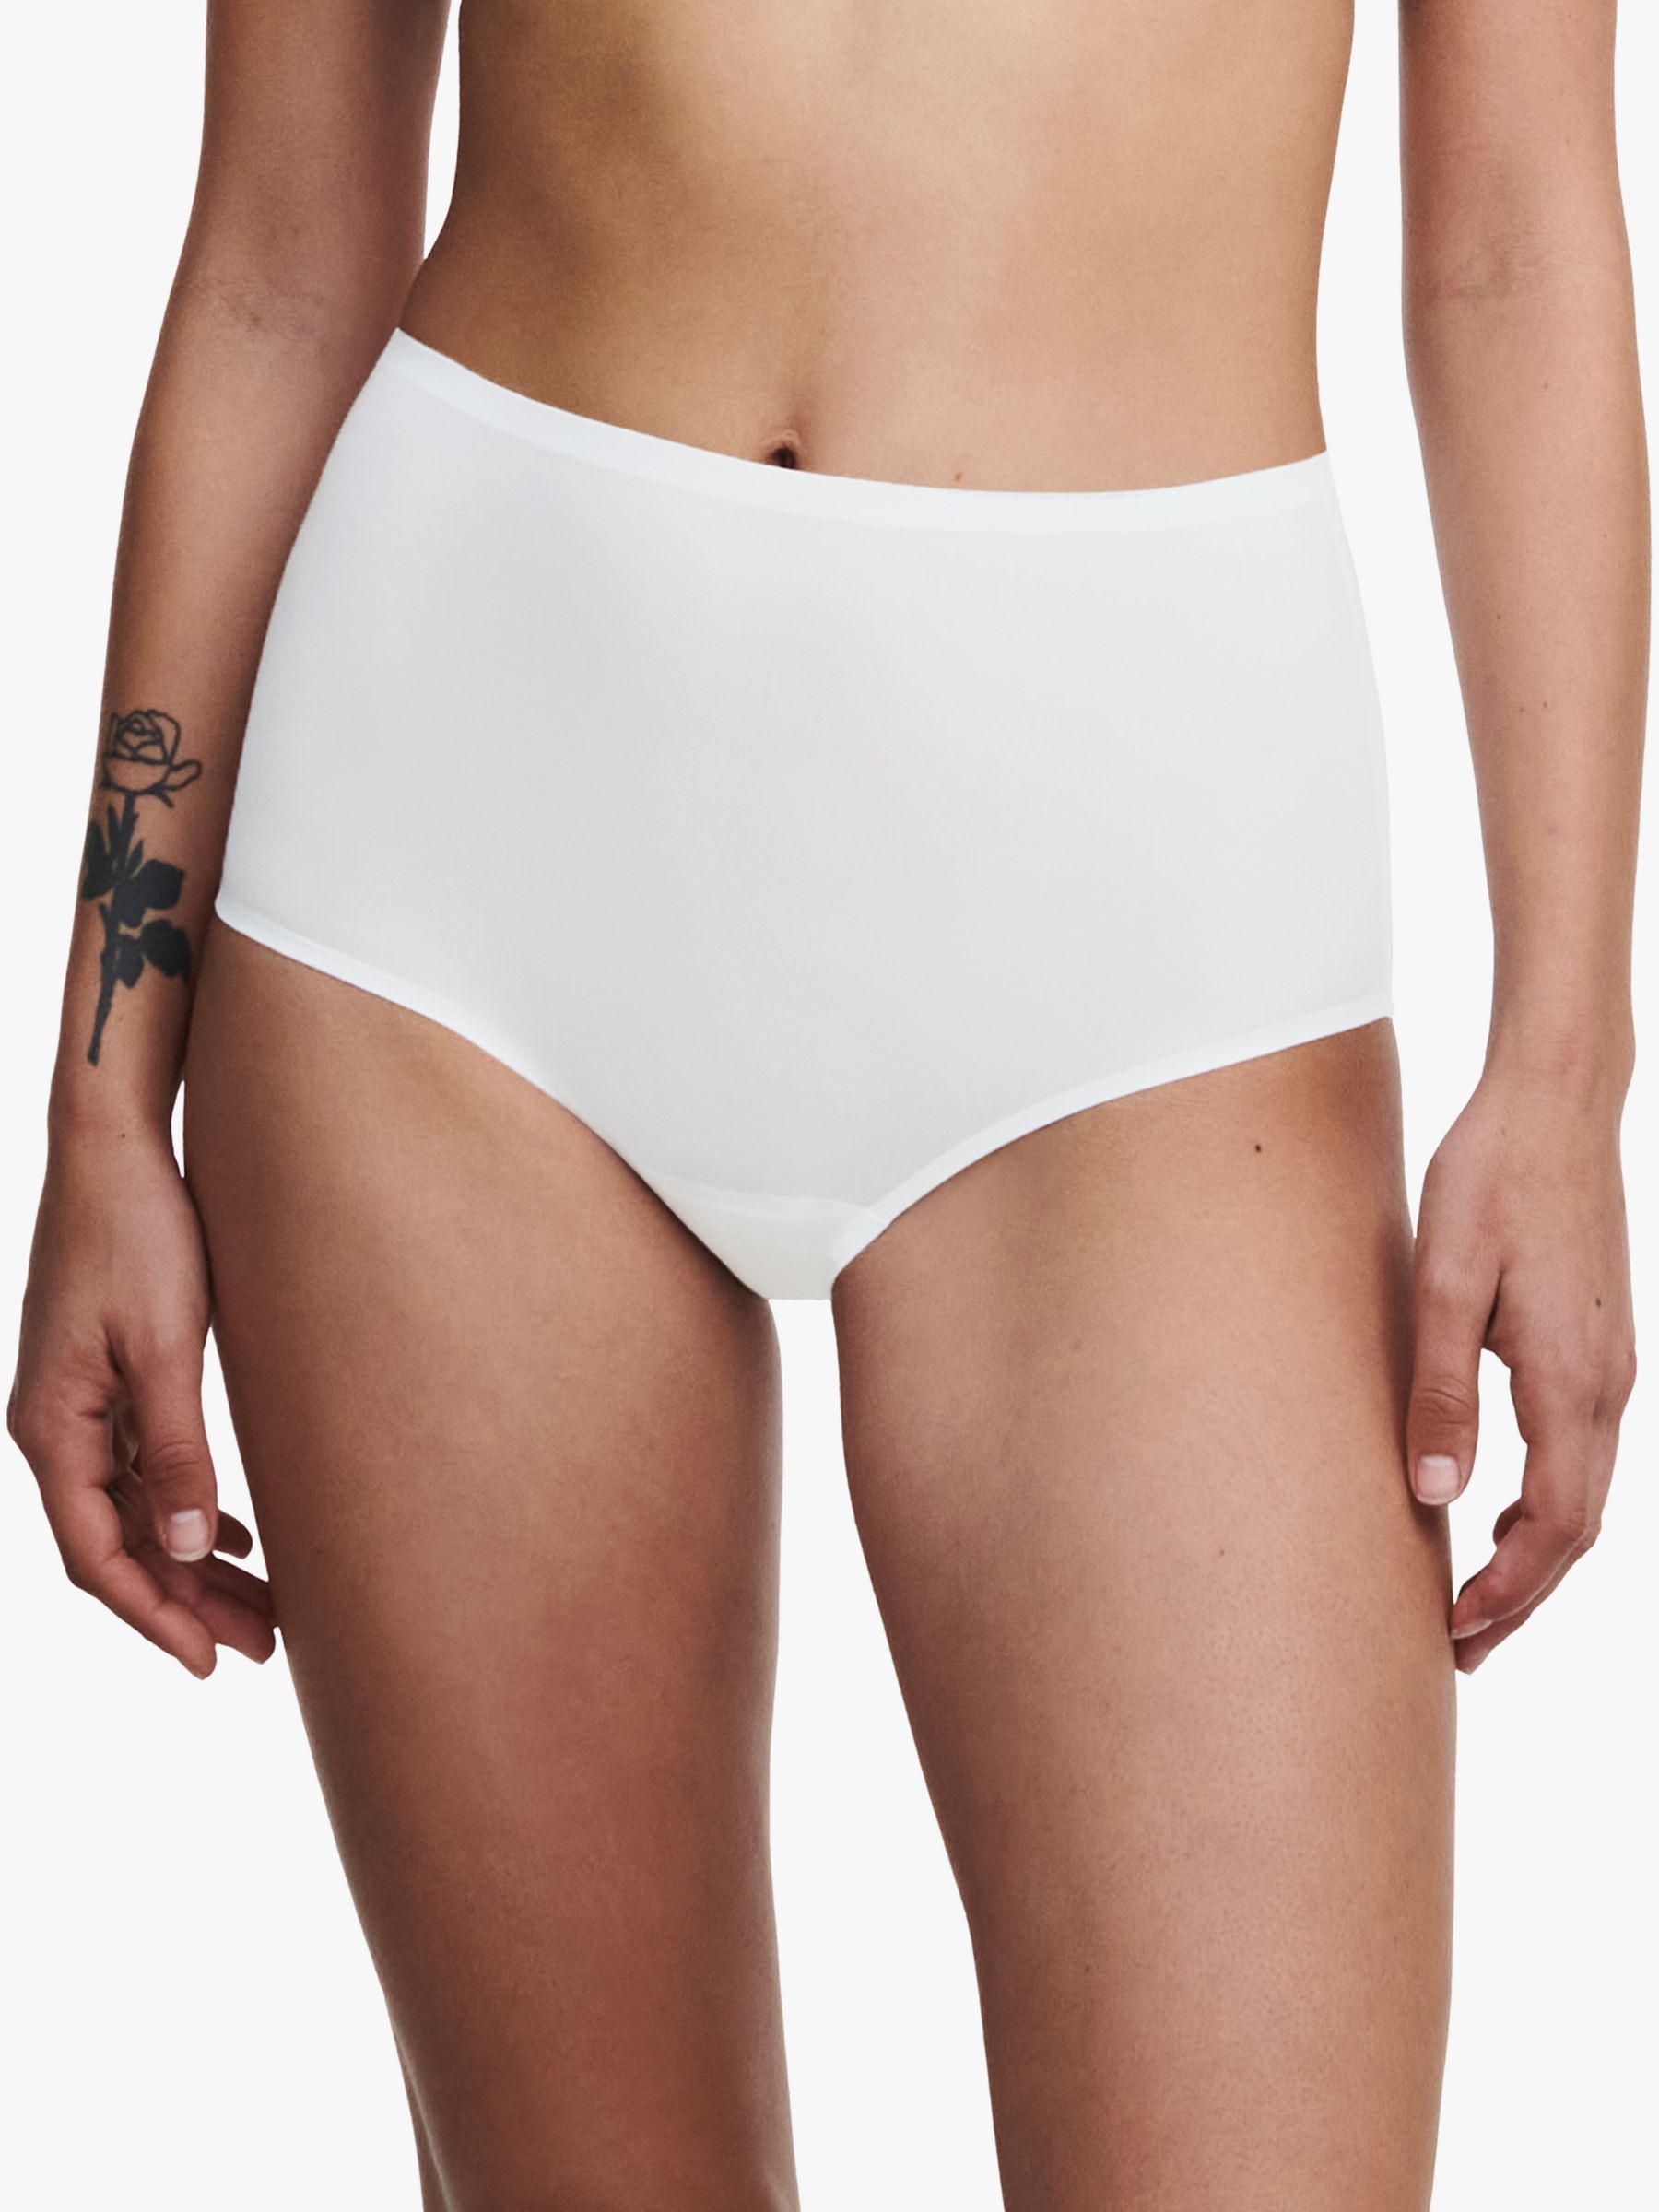 Chantelle Soft Stretch High Waisted Knickers, White, One Size